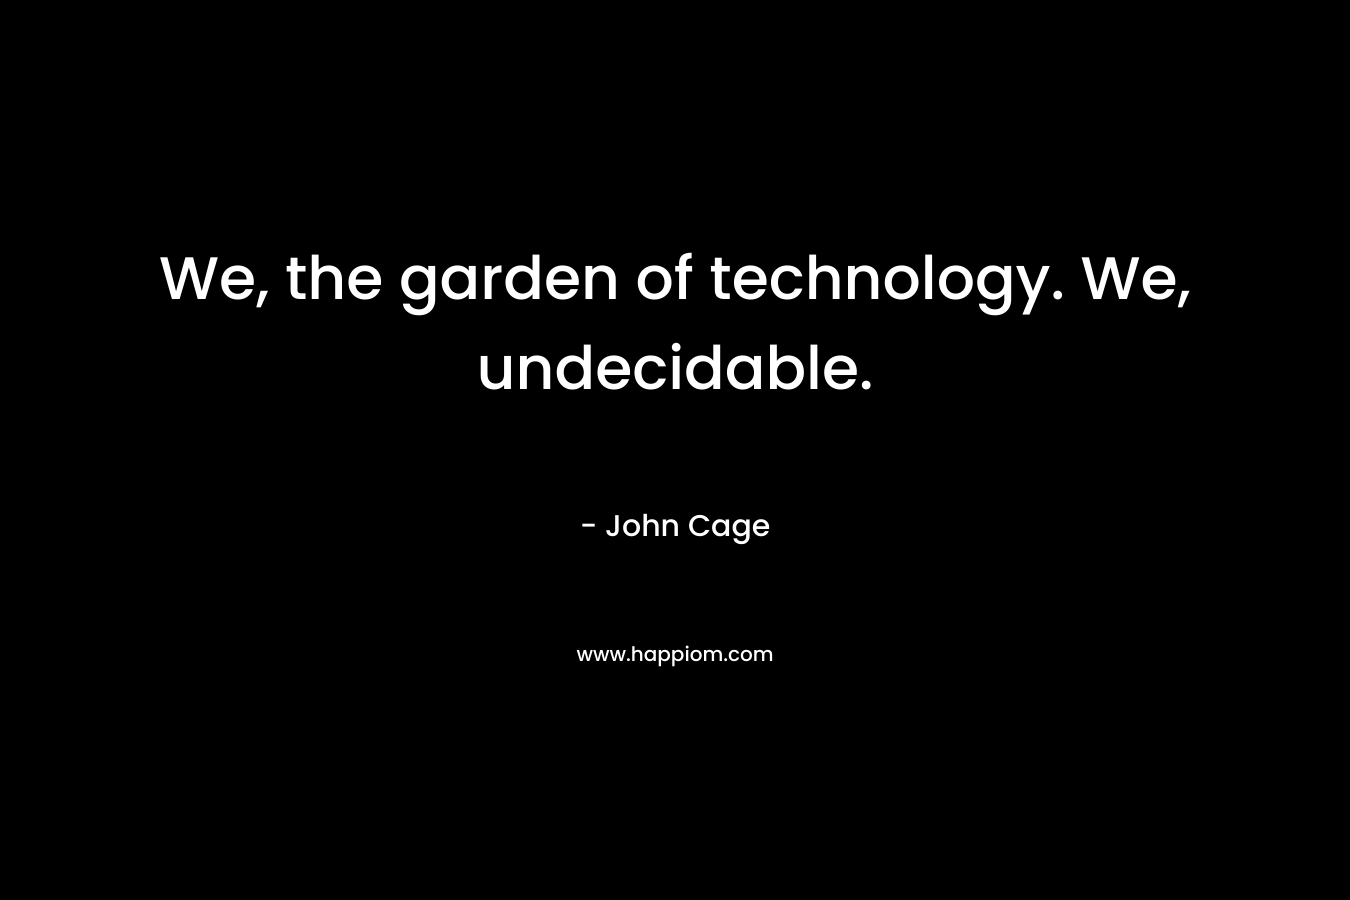 We, the garden of technology. We, undecidable.